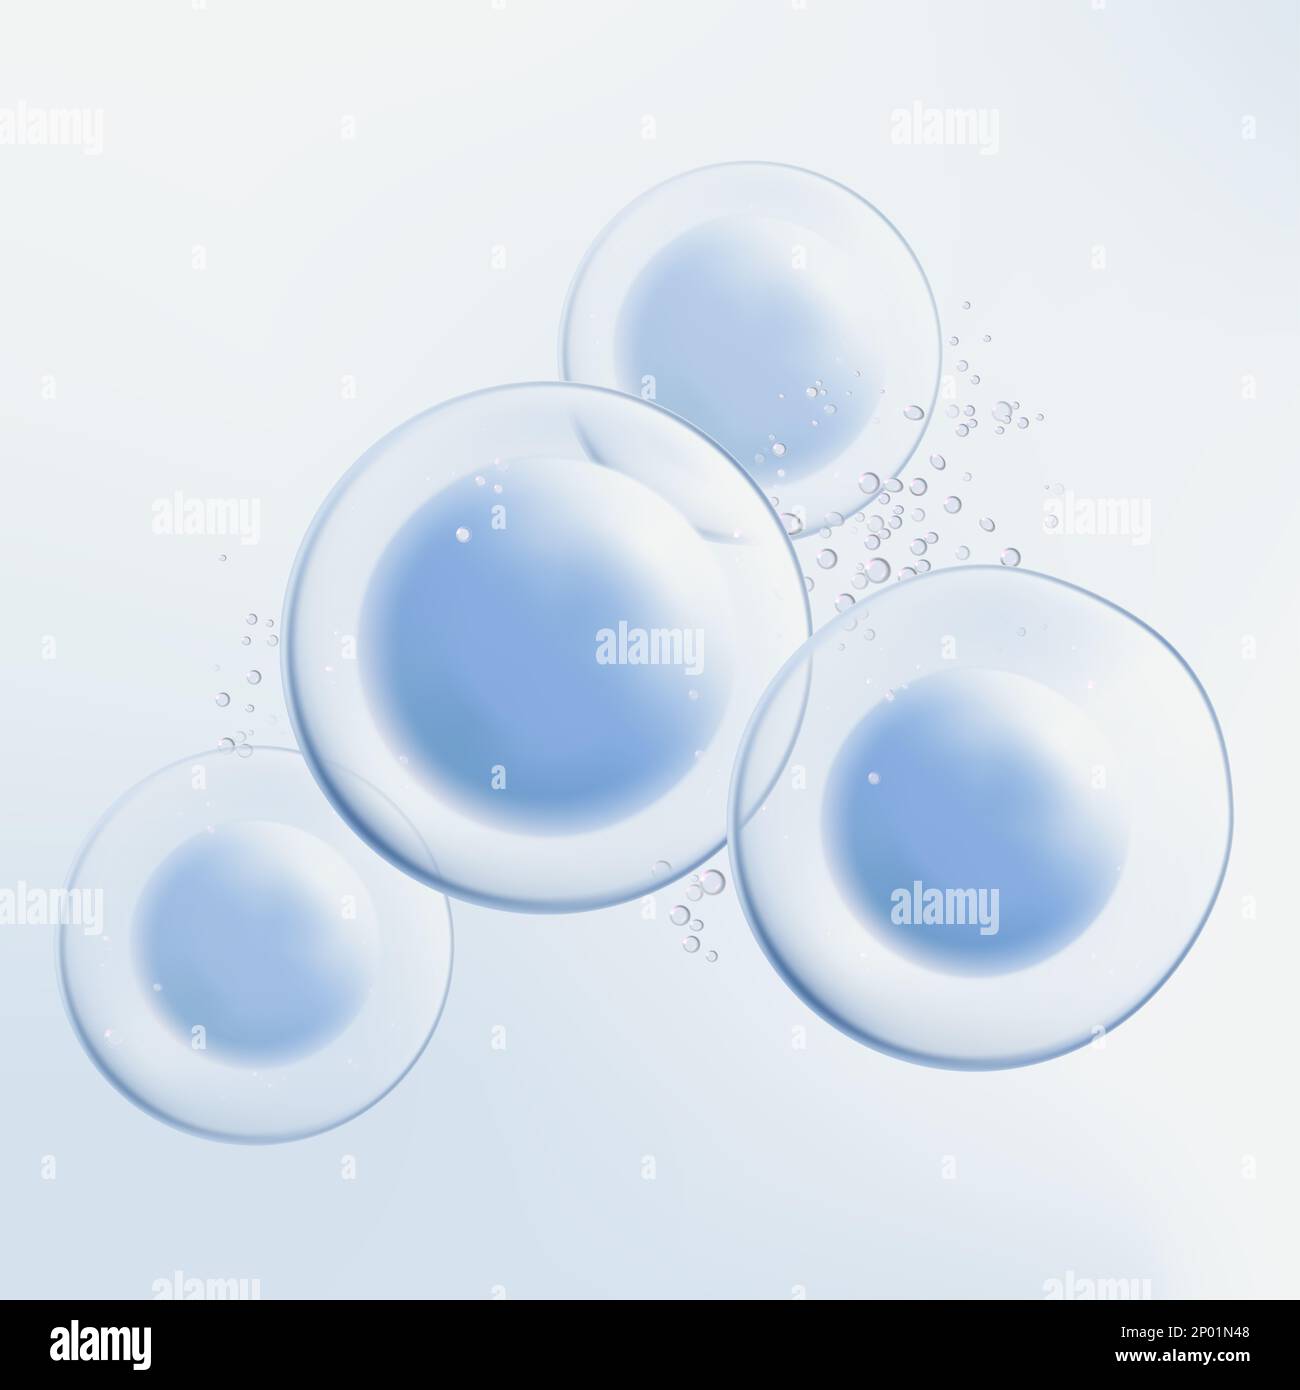 Abstract Transparent Atom, Cell, Nutrition or Collagen Element 3D Illustration for Beauty and Healthcare Poster, Product Packaging, or Advertisement B Stock Photo